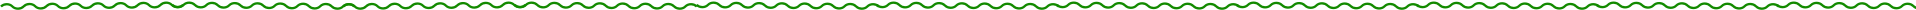 green-squiggly-line-horizontal